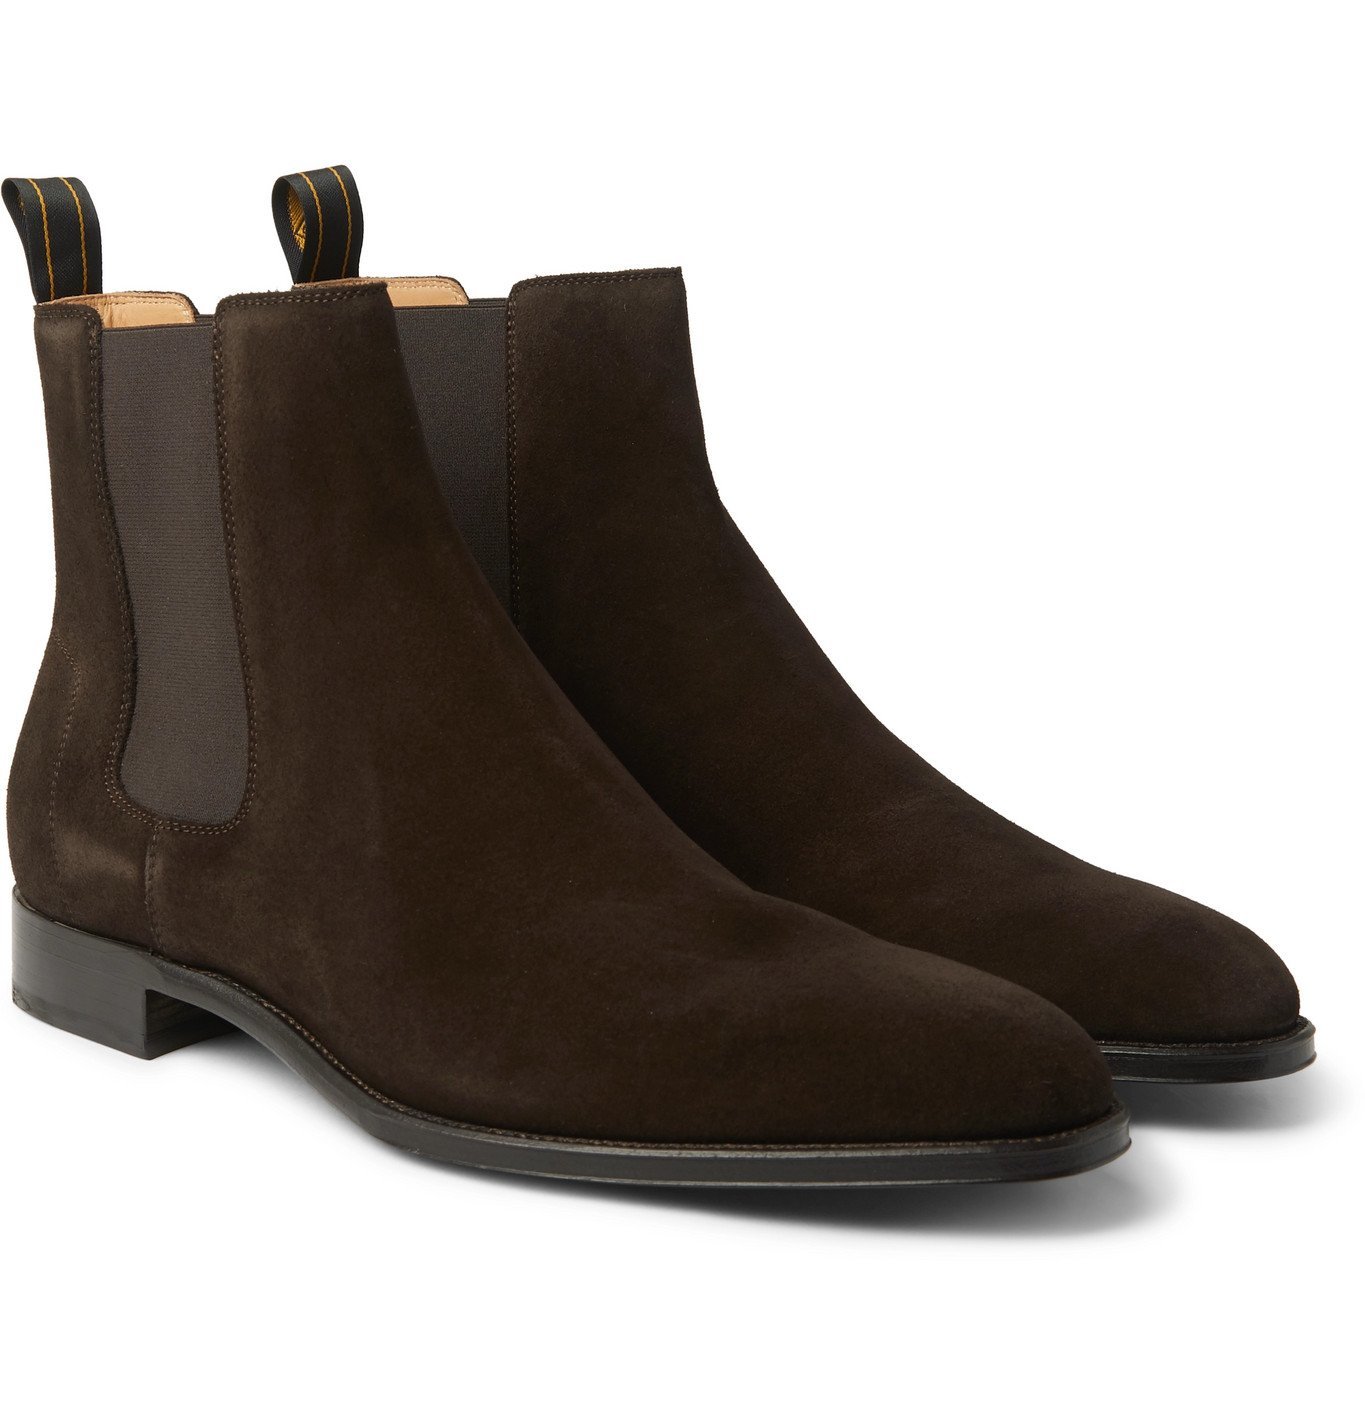 Dunhill - Kensington Suede Chelsea Boots - Brown Dunhill